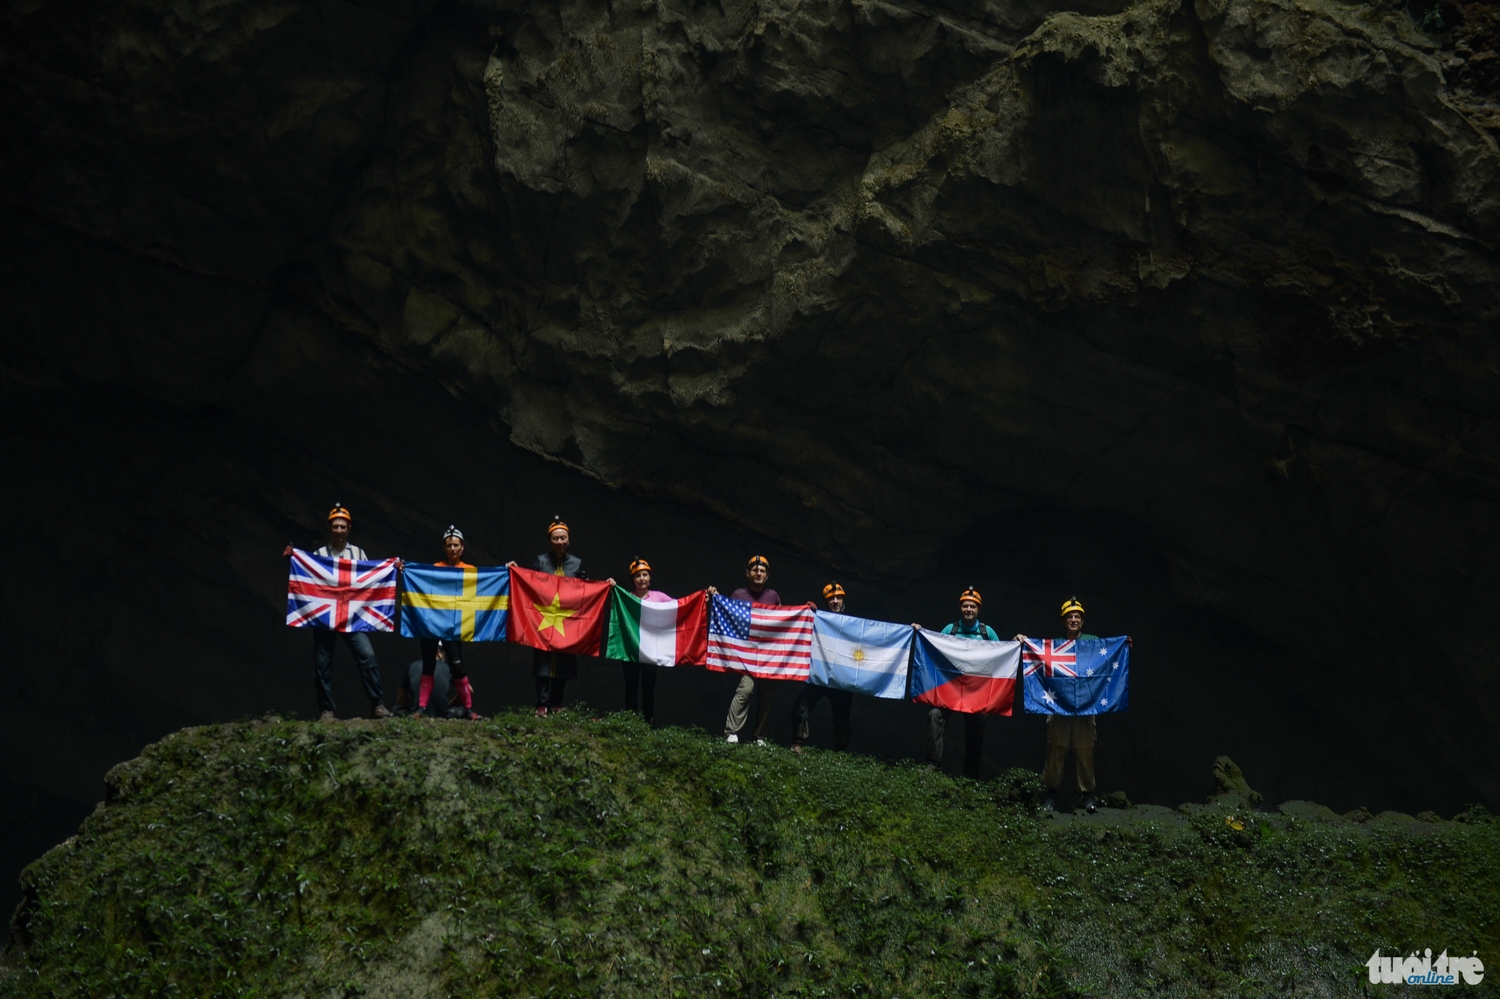 The diplomats pose with their national flags at the first sinkhole.